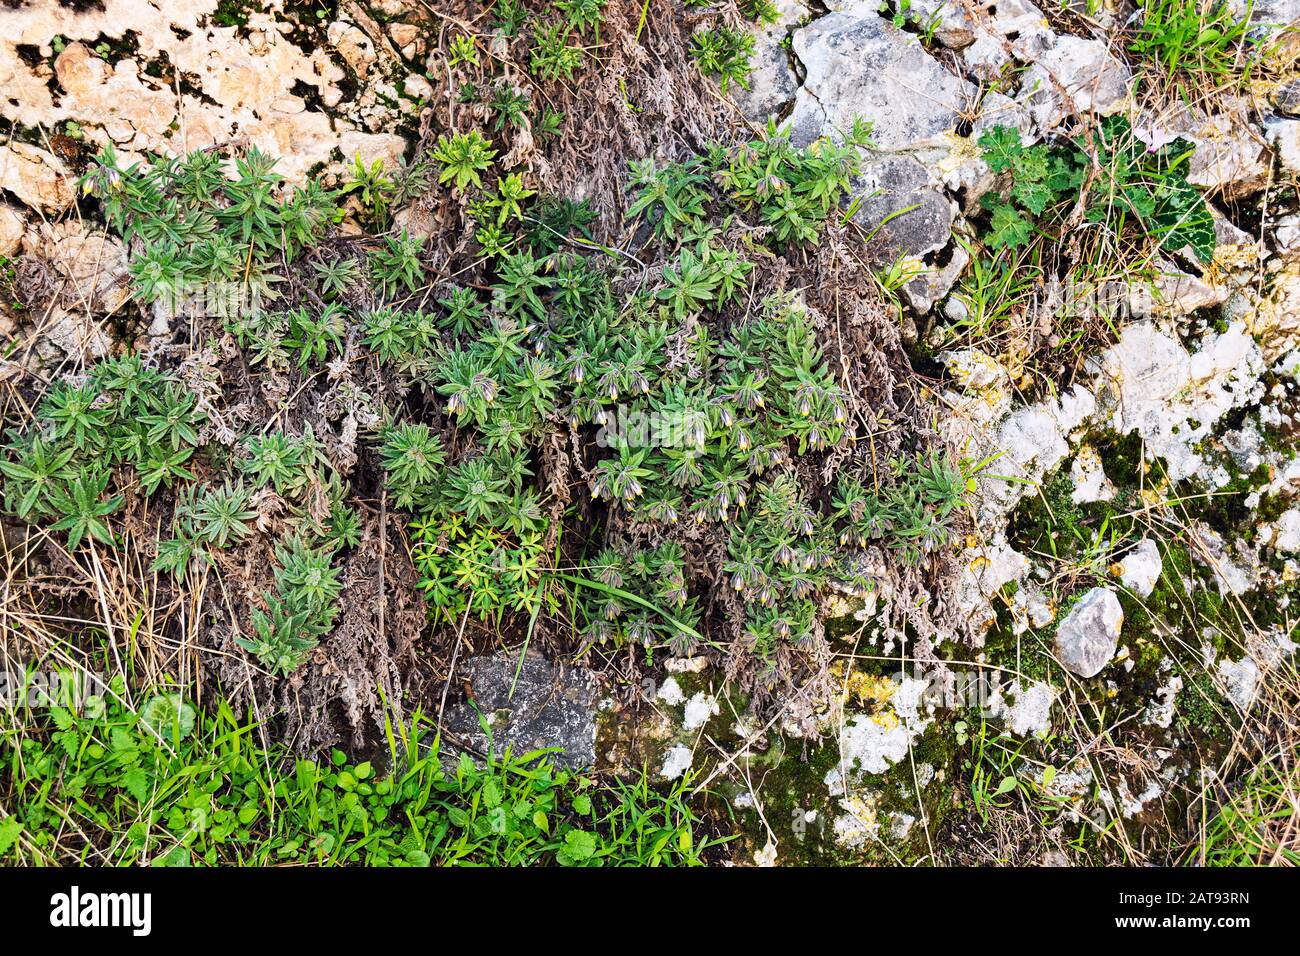 Flowering golden drops Podonosma orientalis dwarf shrub growing on a rocky cliff surrounded by other vegetation in the ein prat nature reserve in the Stock Photo